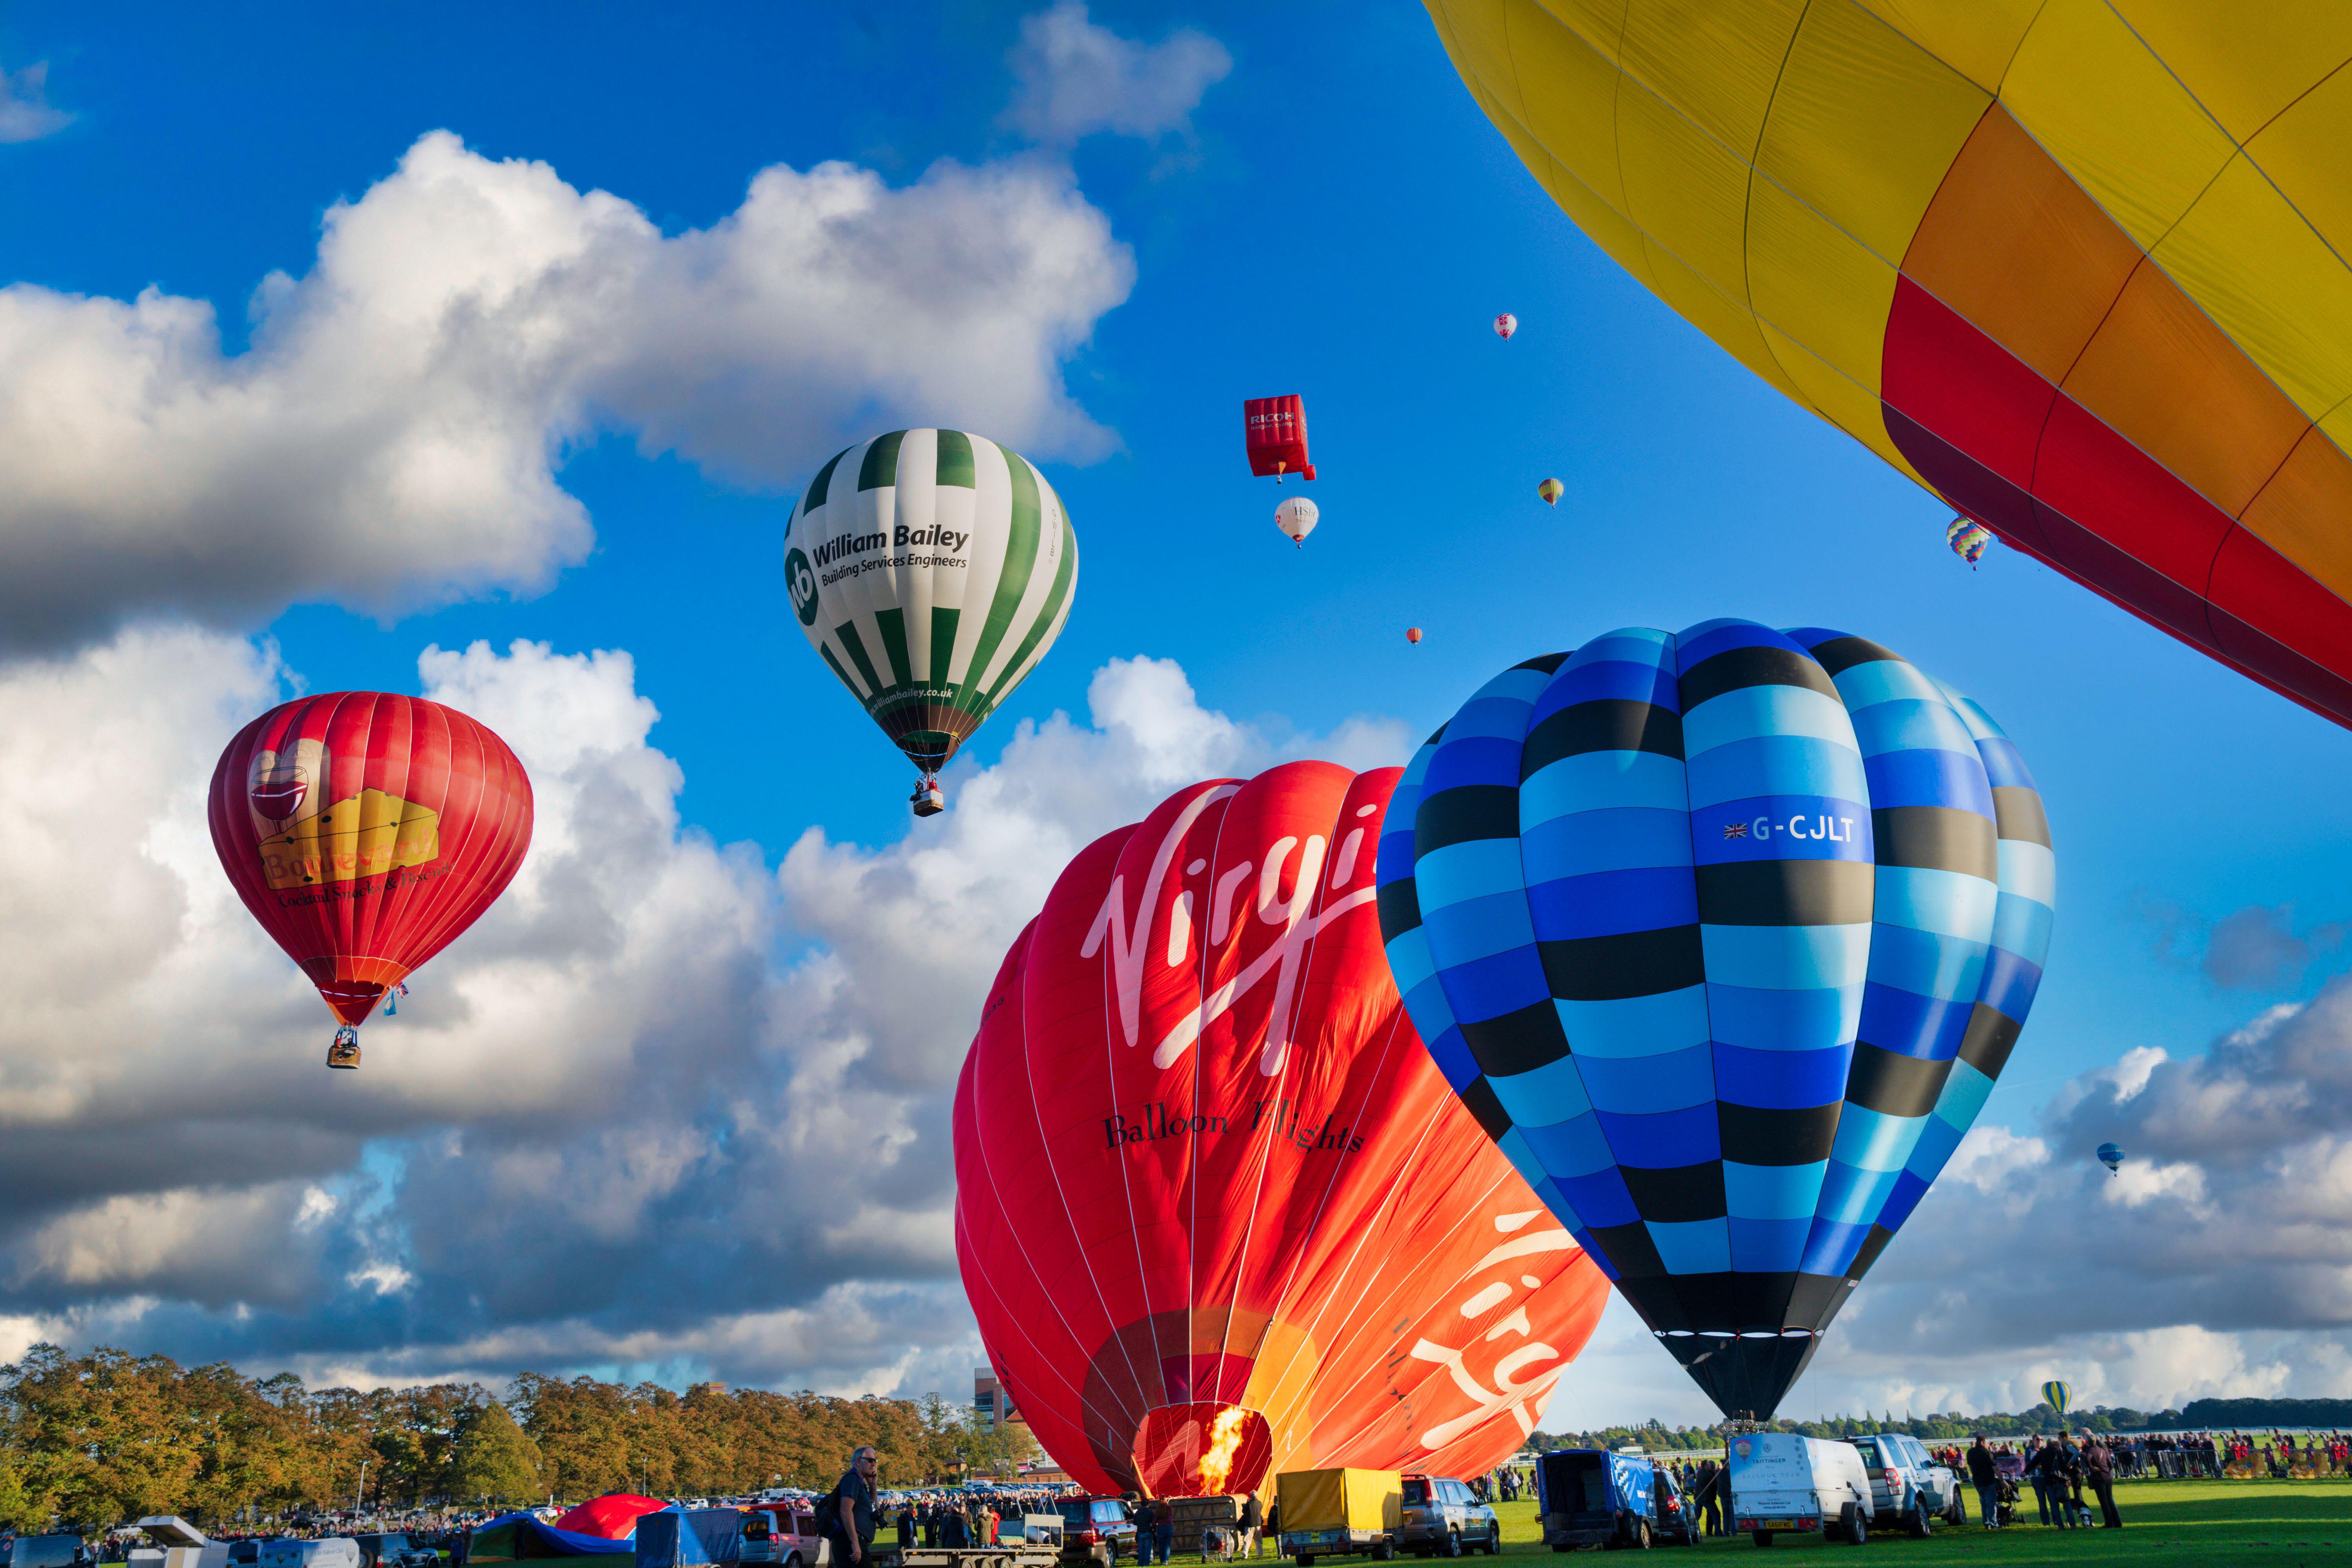 Brand new event coming to the UK this year - with glow in the dark hot air balloons